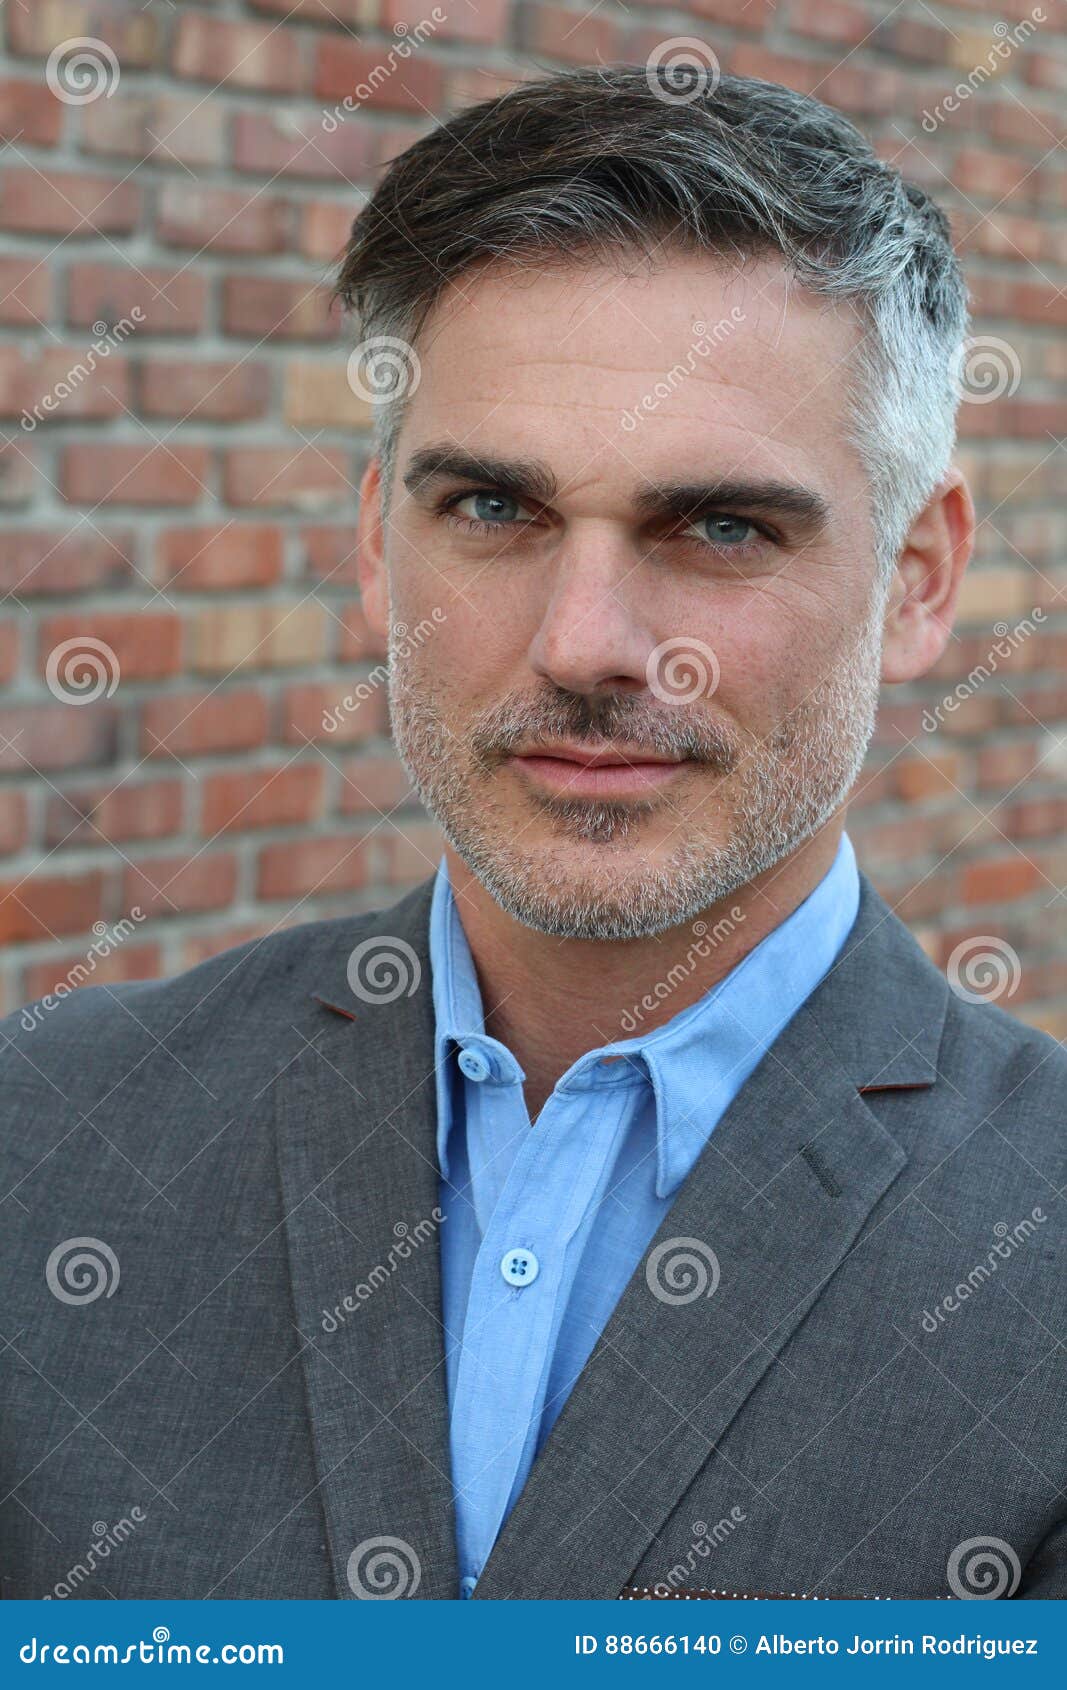 Man with Salt and Pepper Hair Close Up Stock Photo - Image of closeup,  forties: 88666140